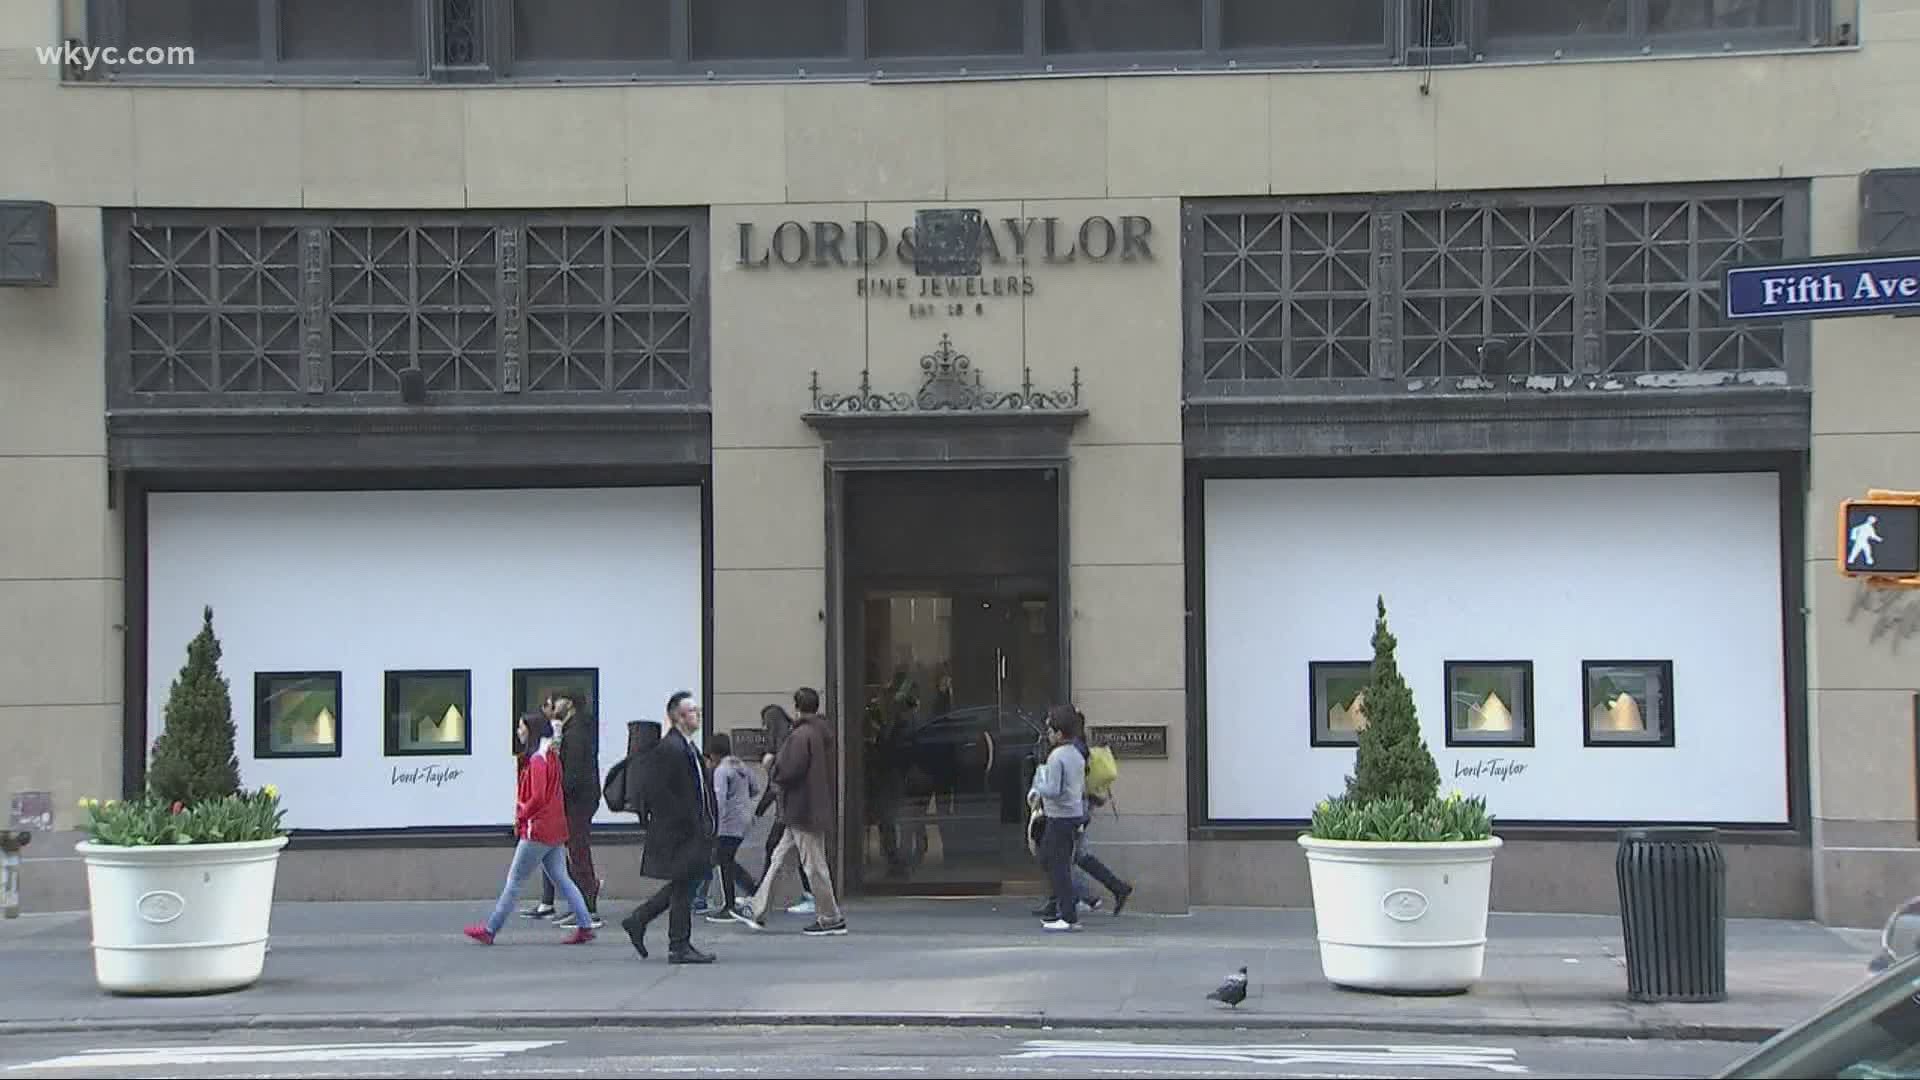 The company filed for bankruptcy earlier this month.
Lord & Taylor will permanently close its remaining 38 stores and shut down its website.